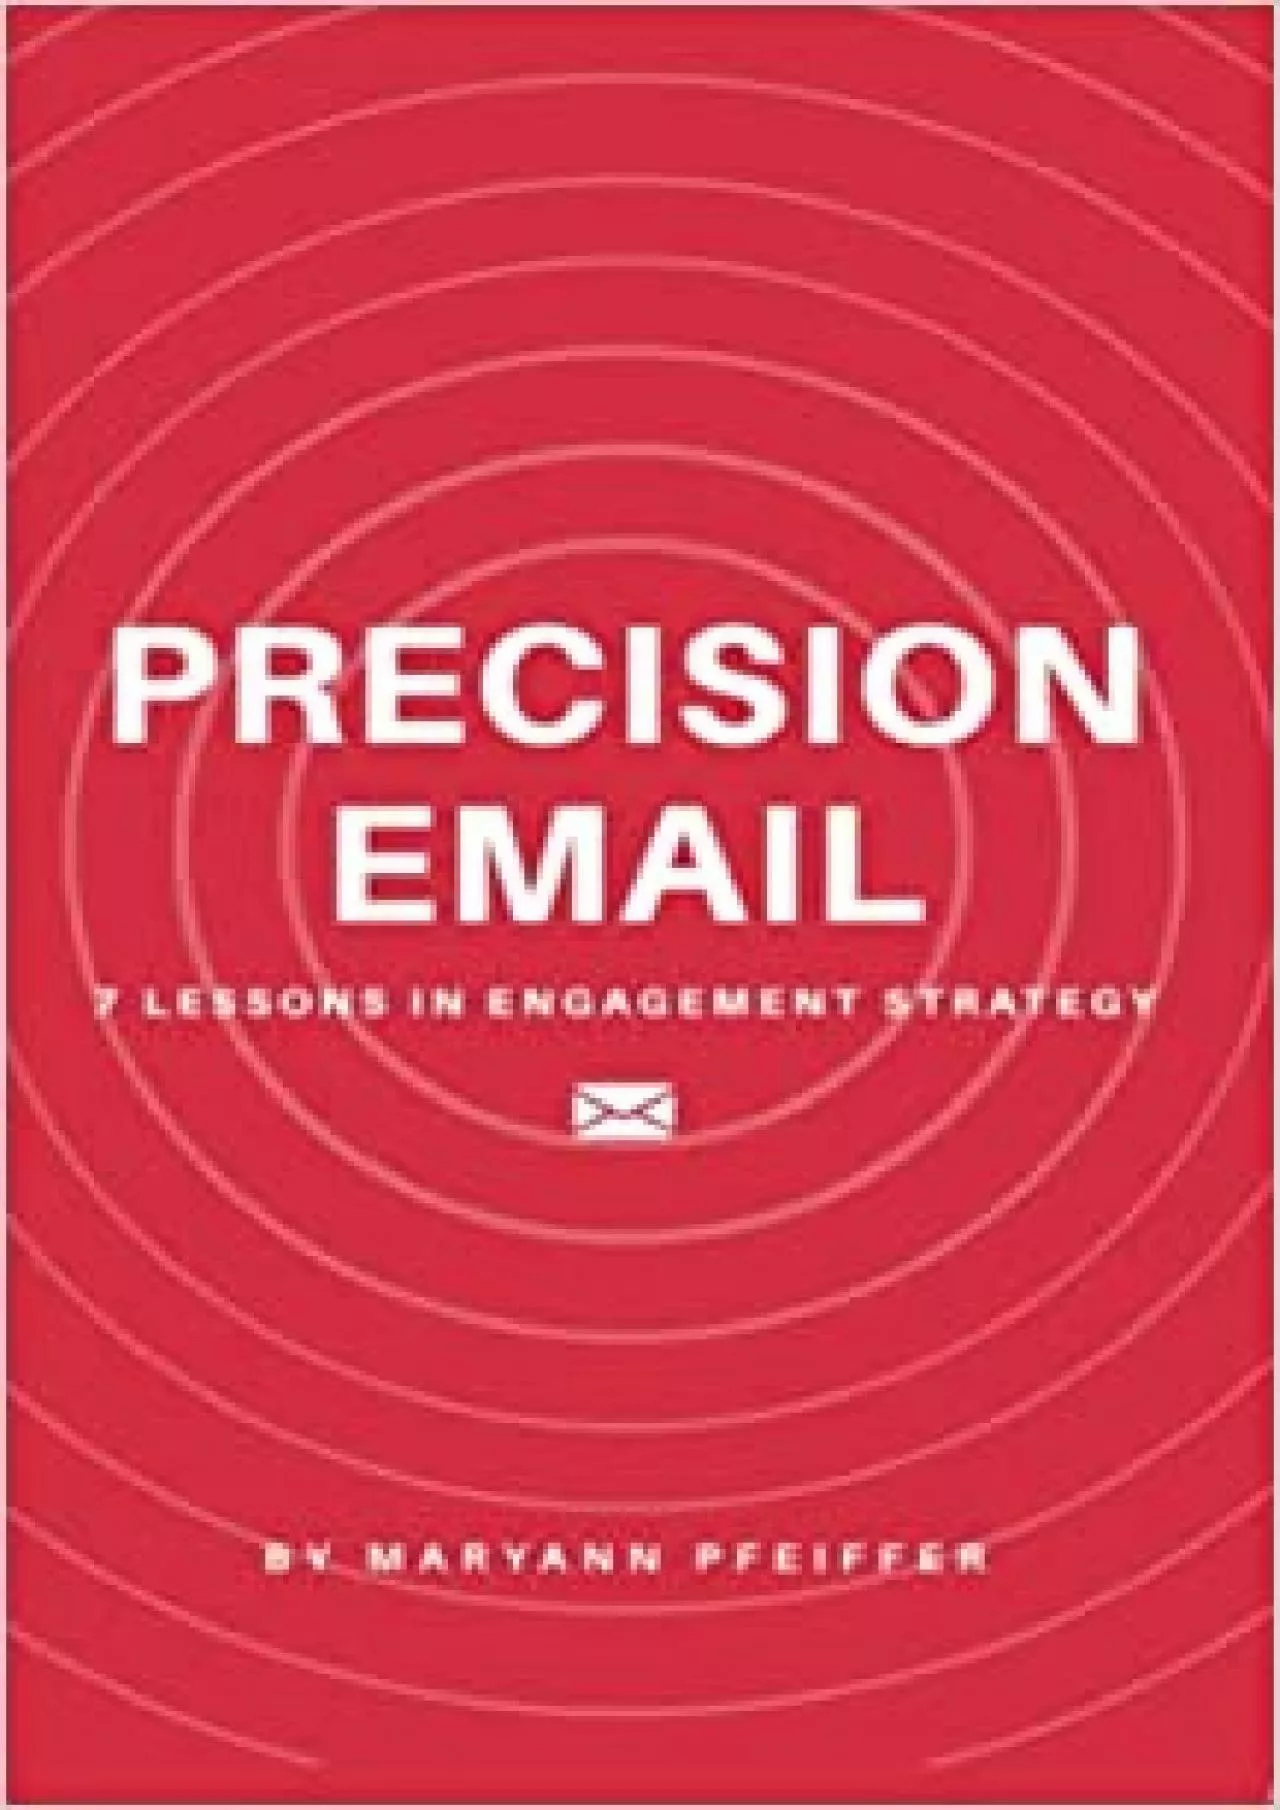 Precision Email: 7 Lessons in Engagement Strategy